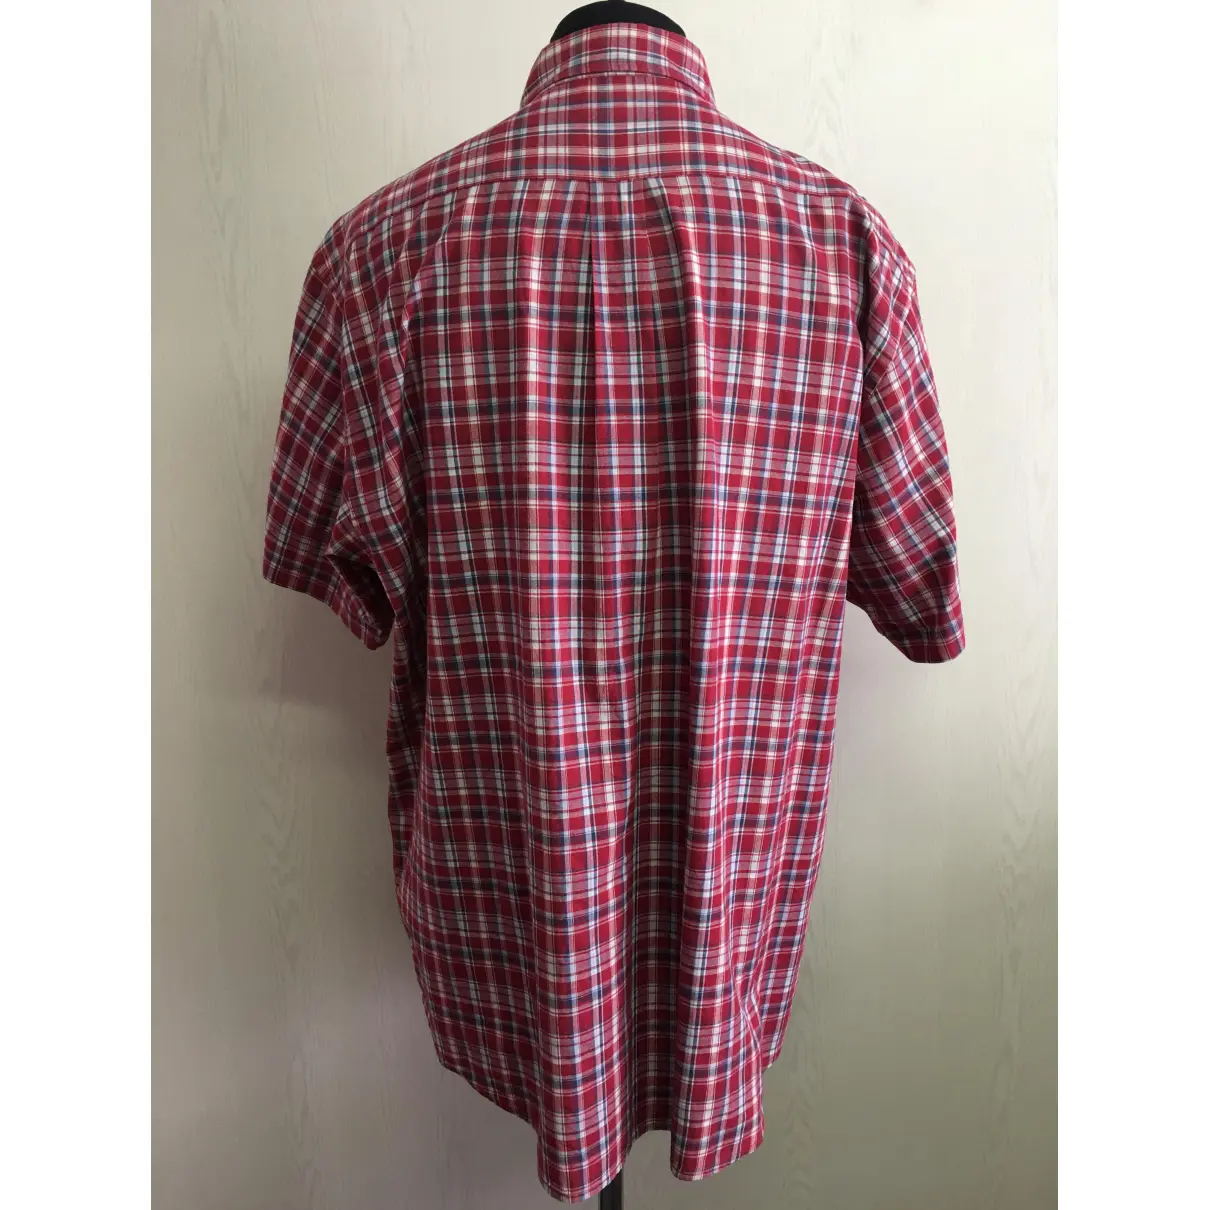 Buy Brooks Brothers Shirt online